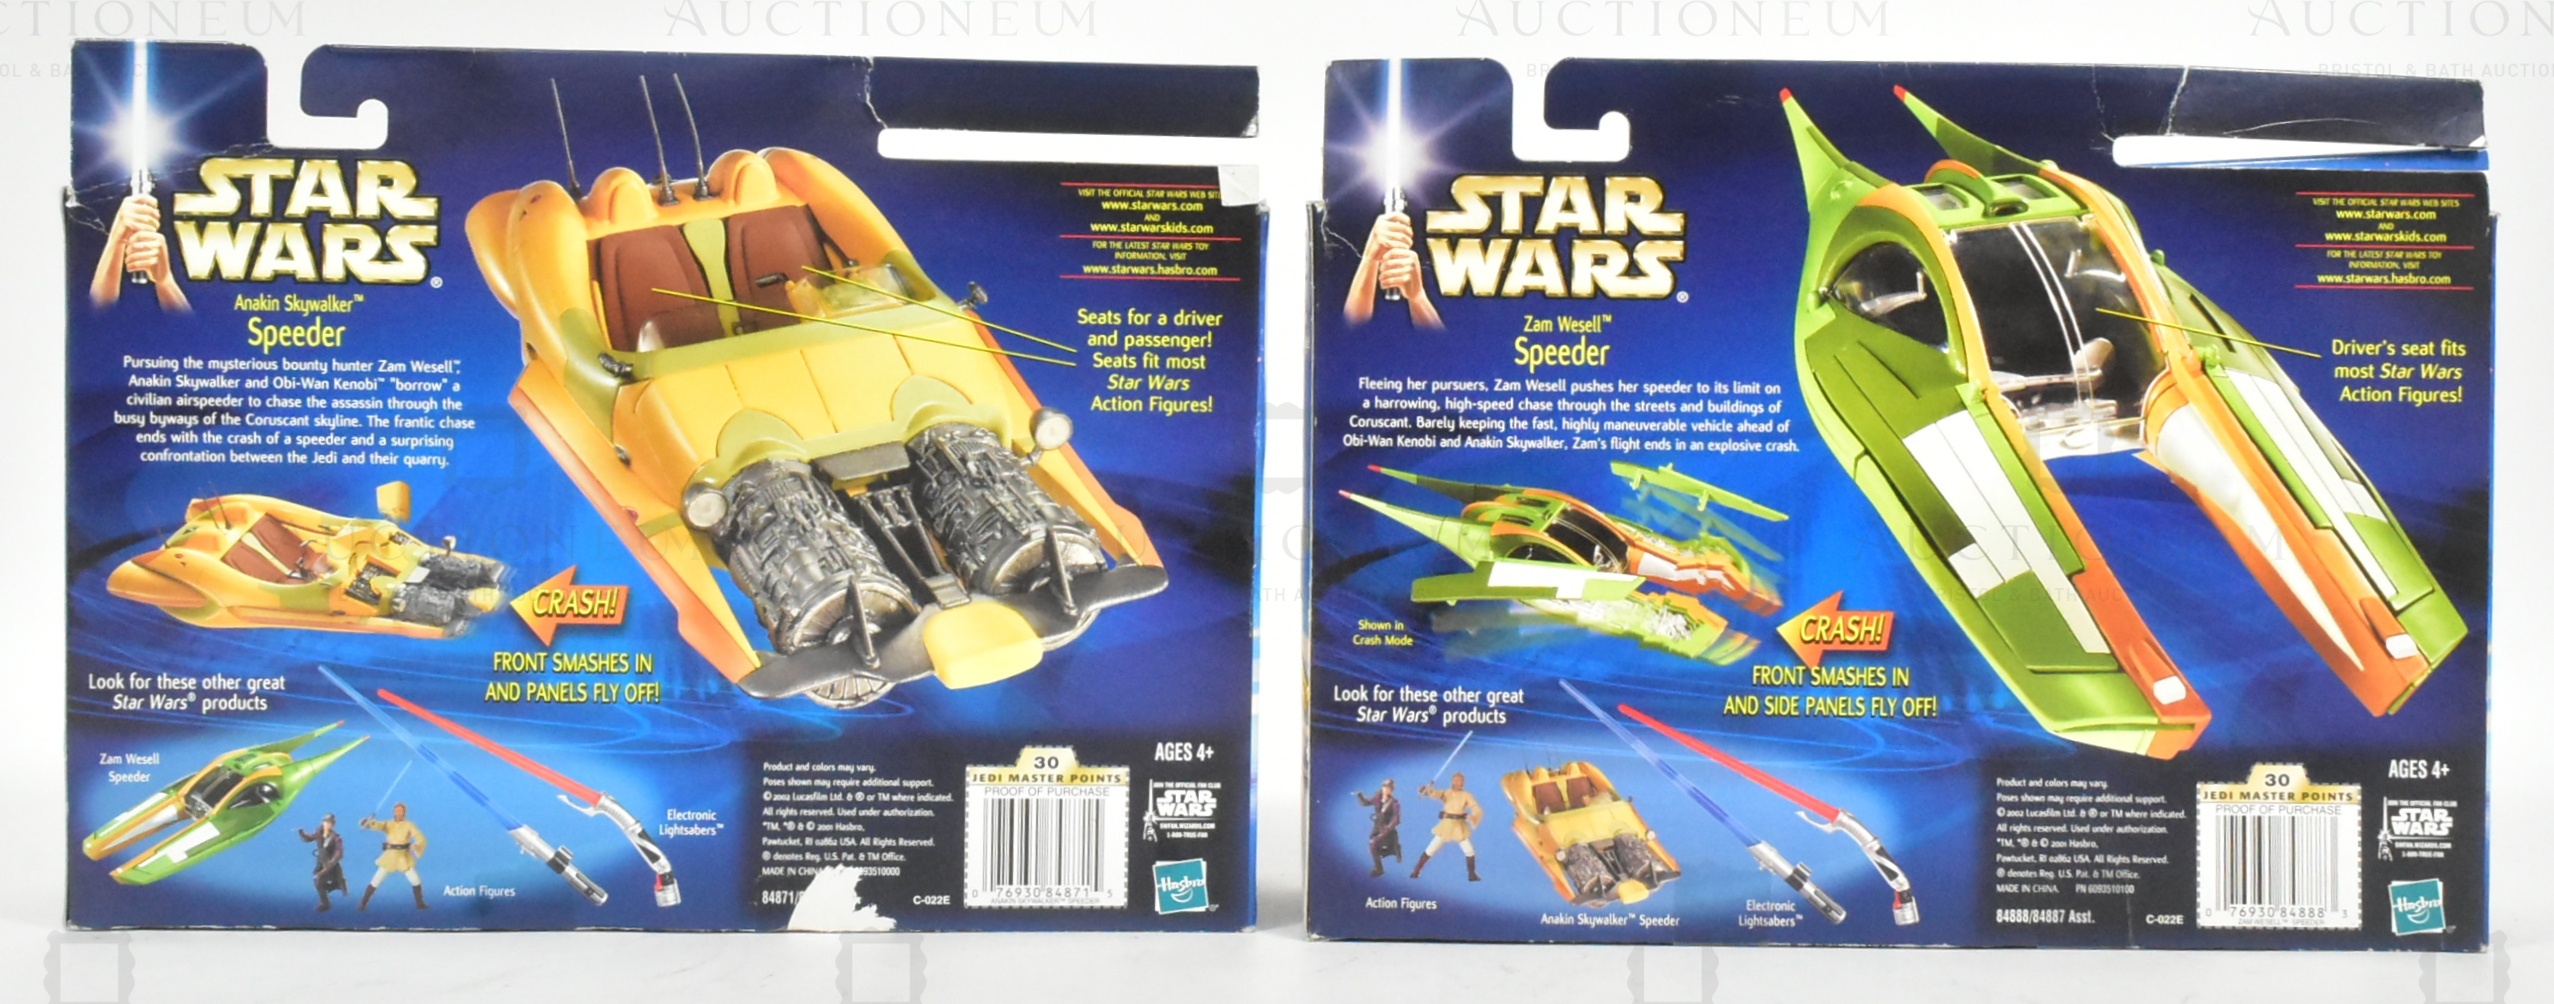 STAR WARS - ATTACK OF THE CLONES - BOXED PLAYSETS - Image 4 of 4